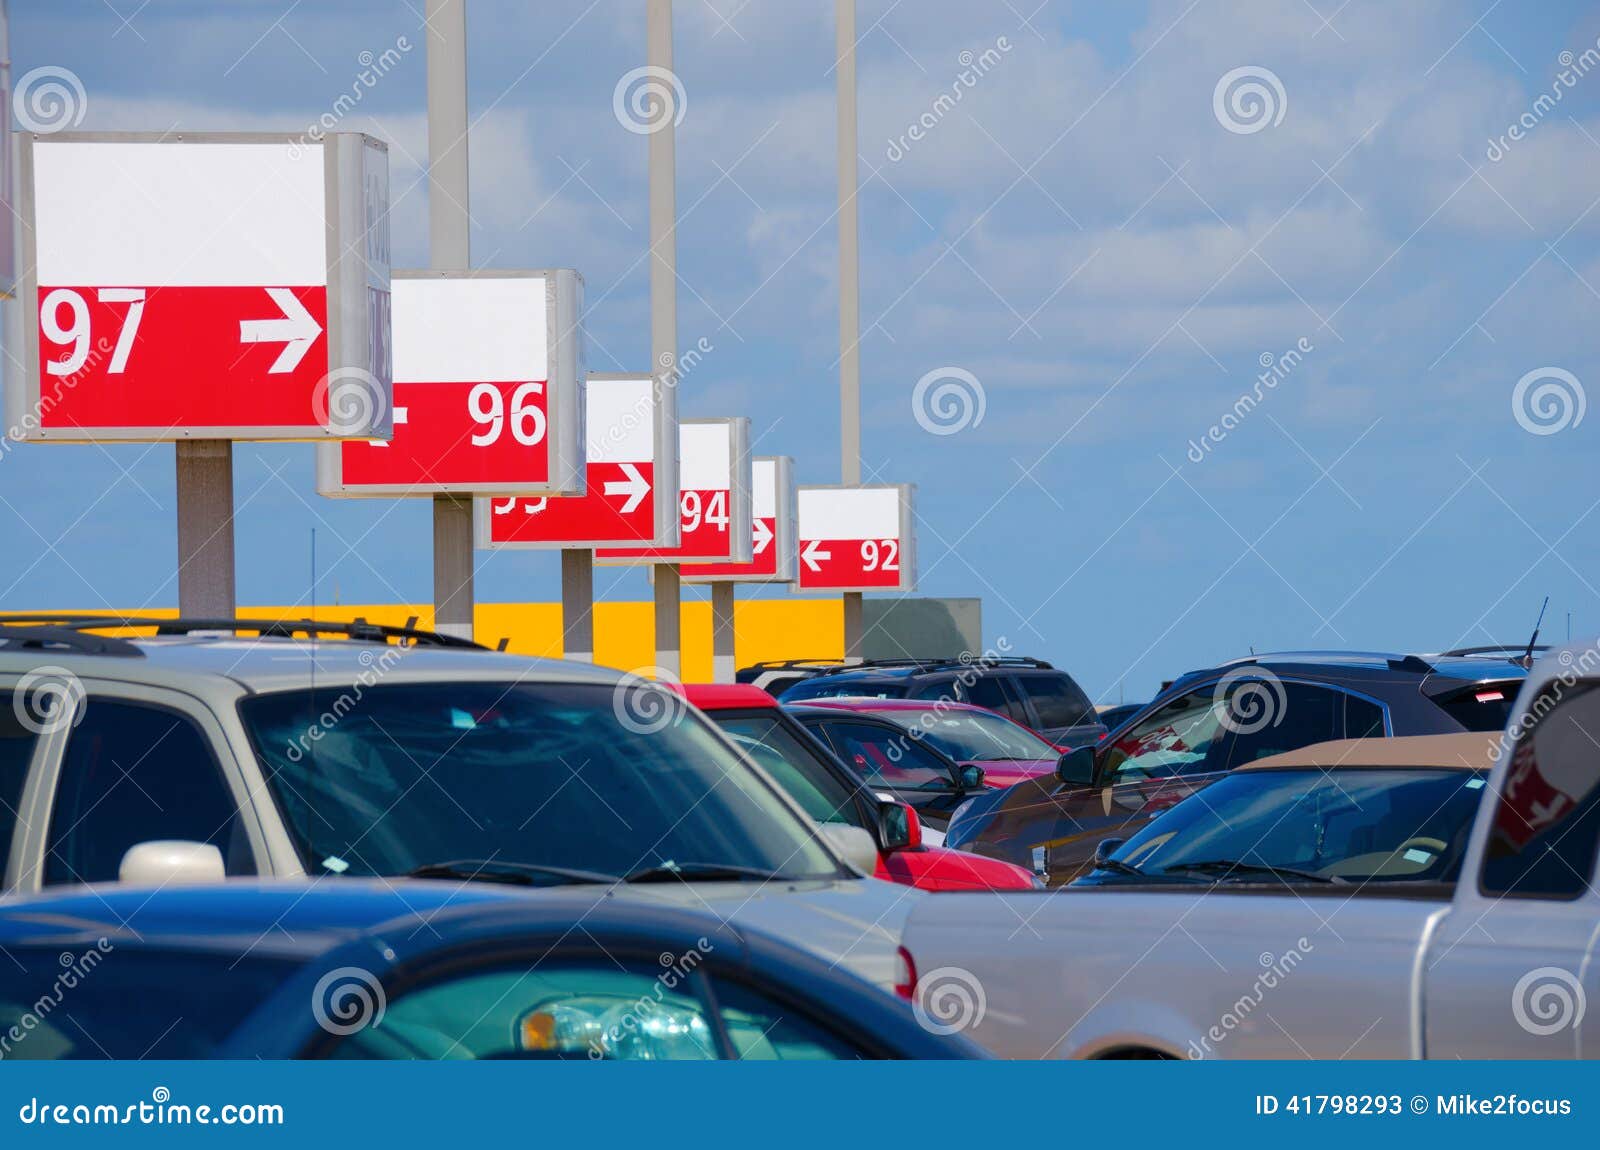 Numbered Parking Lot With Many Cars Stock Image - Image of automobiles